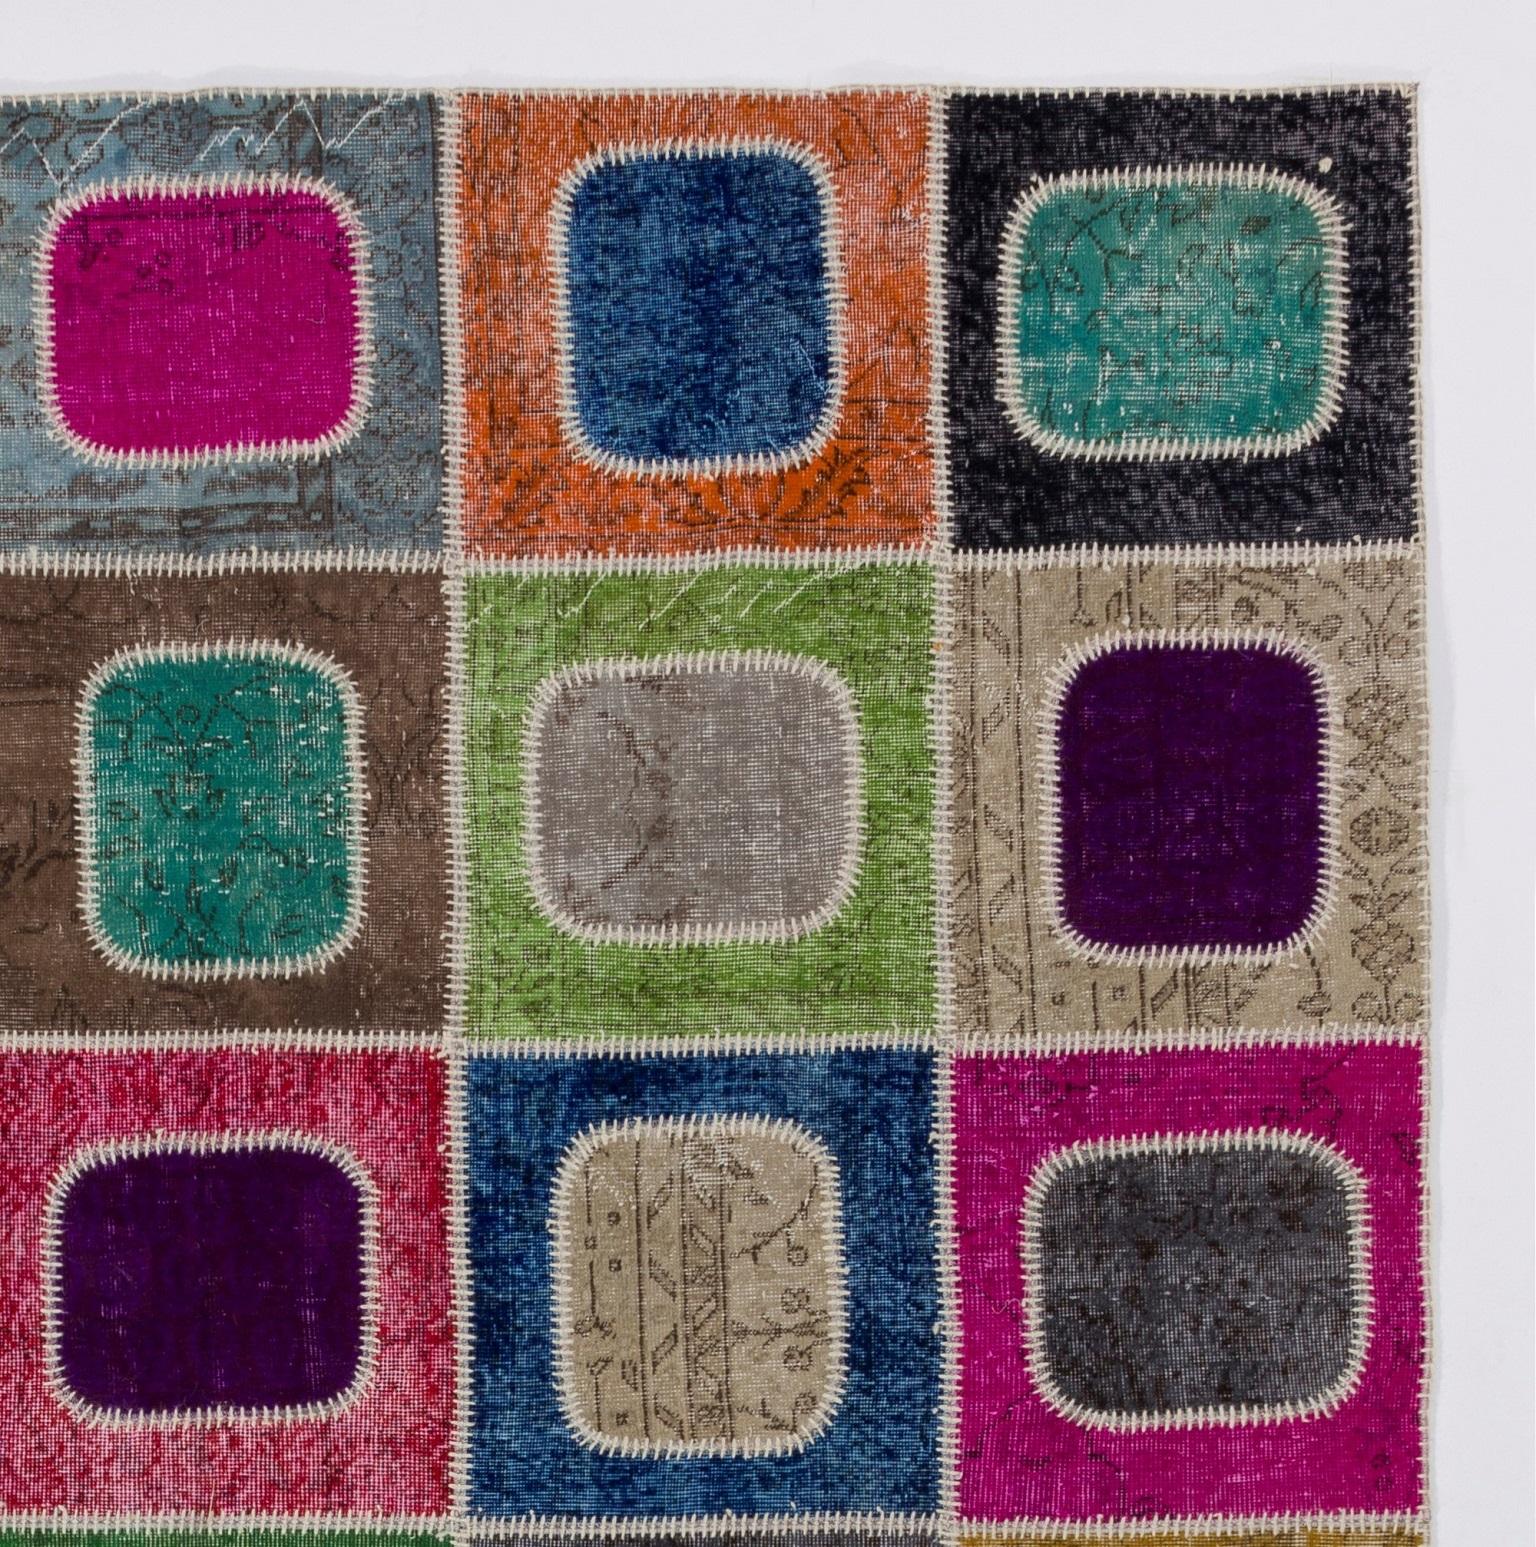 Assorted pieces of mid-20th century hand knotted Turkish rugs that were washed, sheared, re-dyed in various colors and cut into geometric shapes were stitched together by hand in couple of weeks to create this one-of-a-kind patchwork rug. A durable